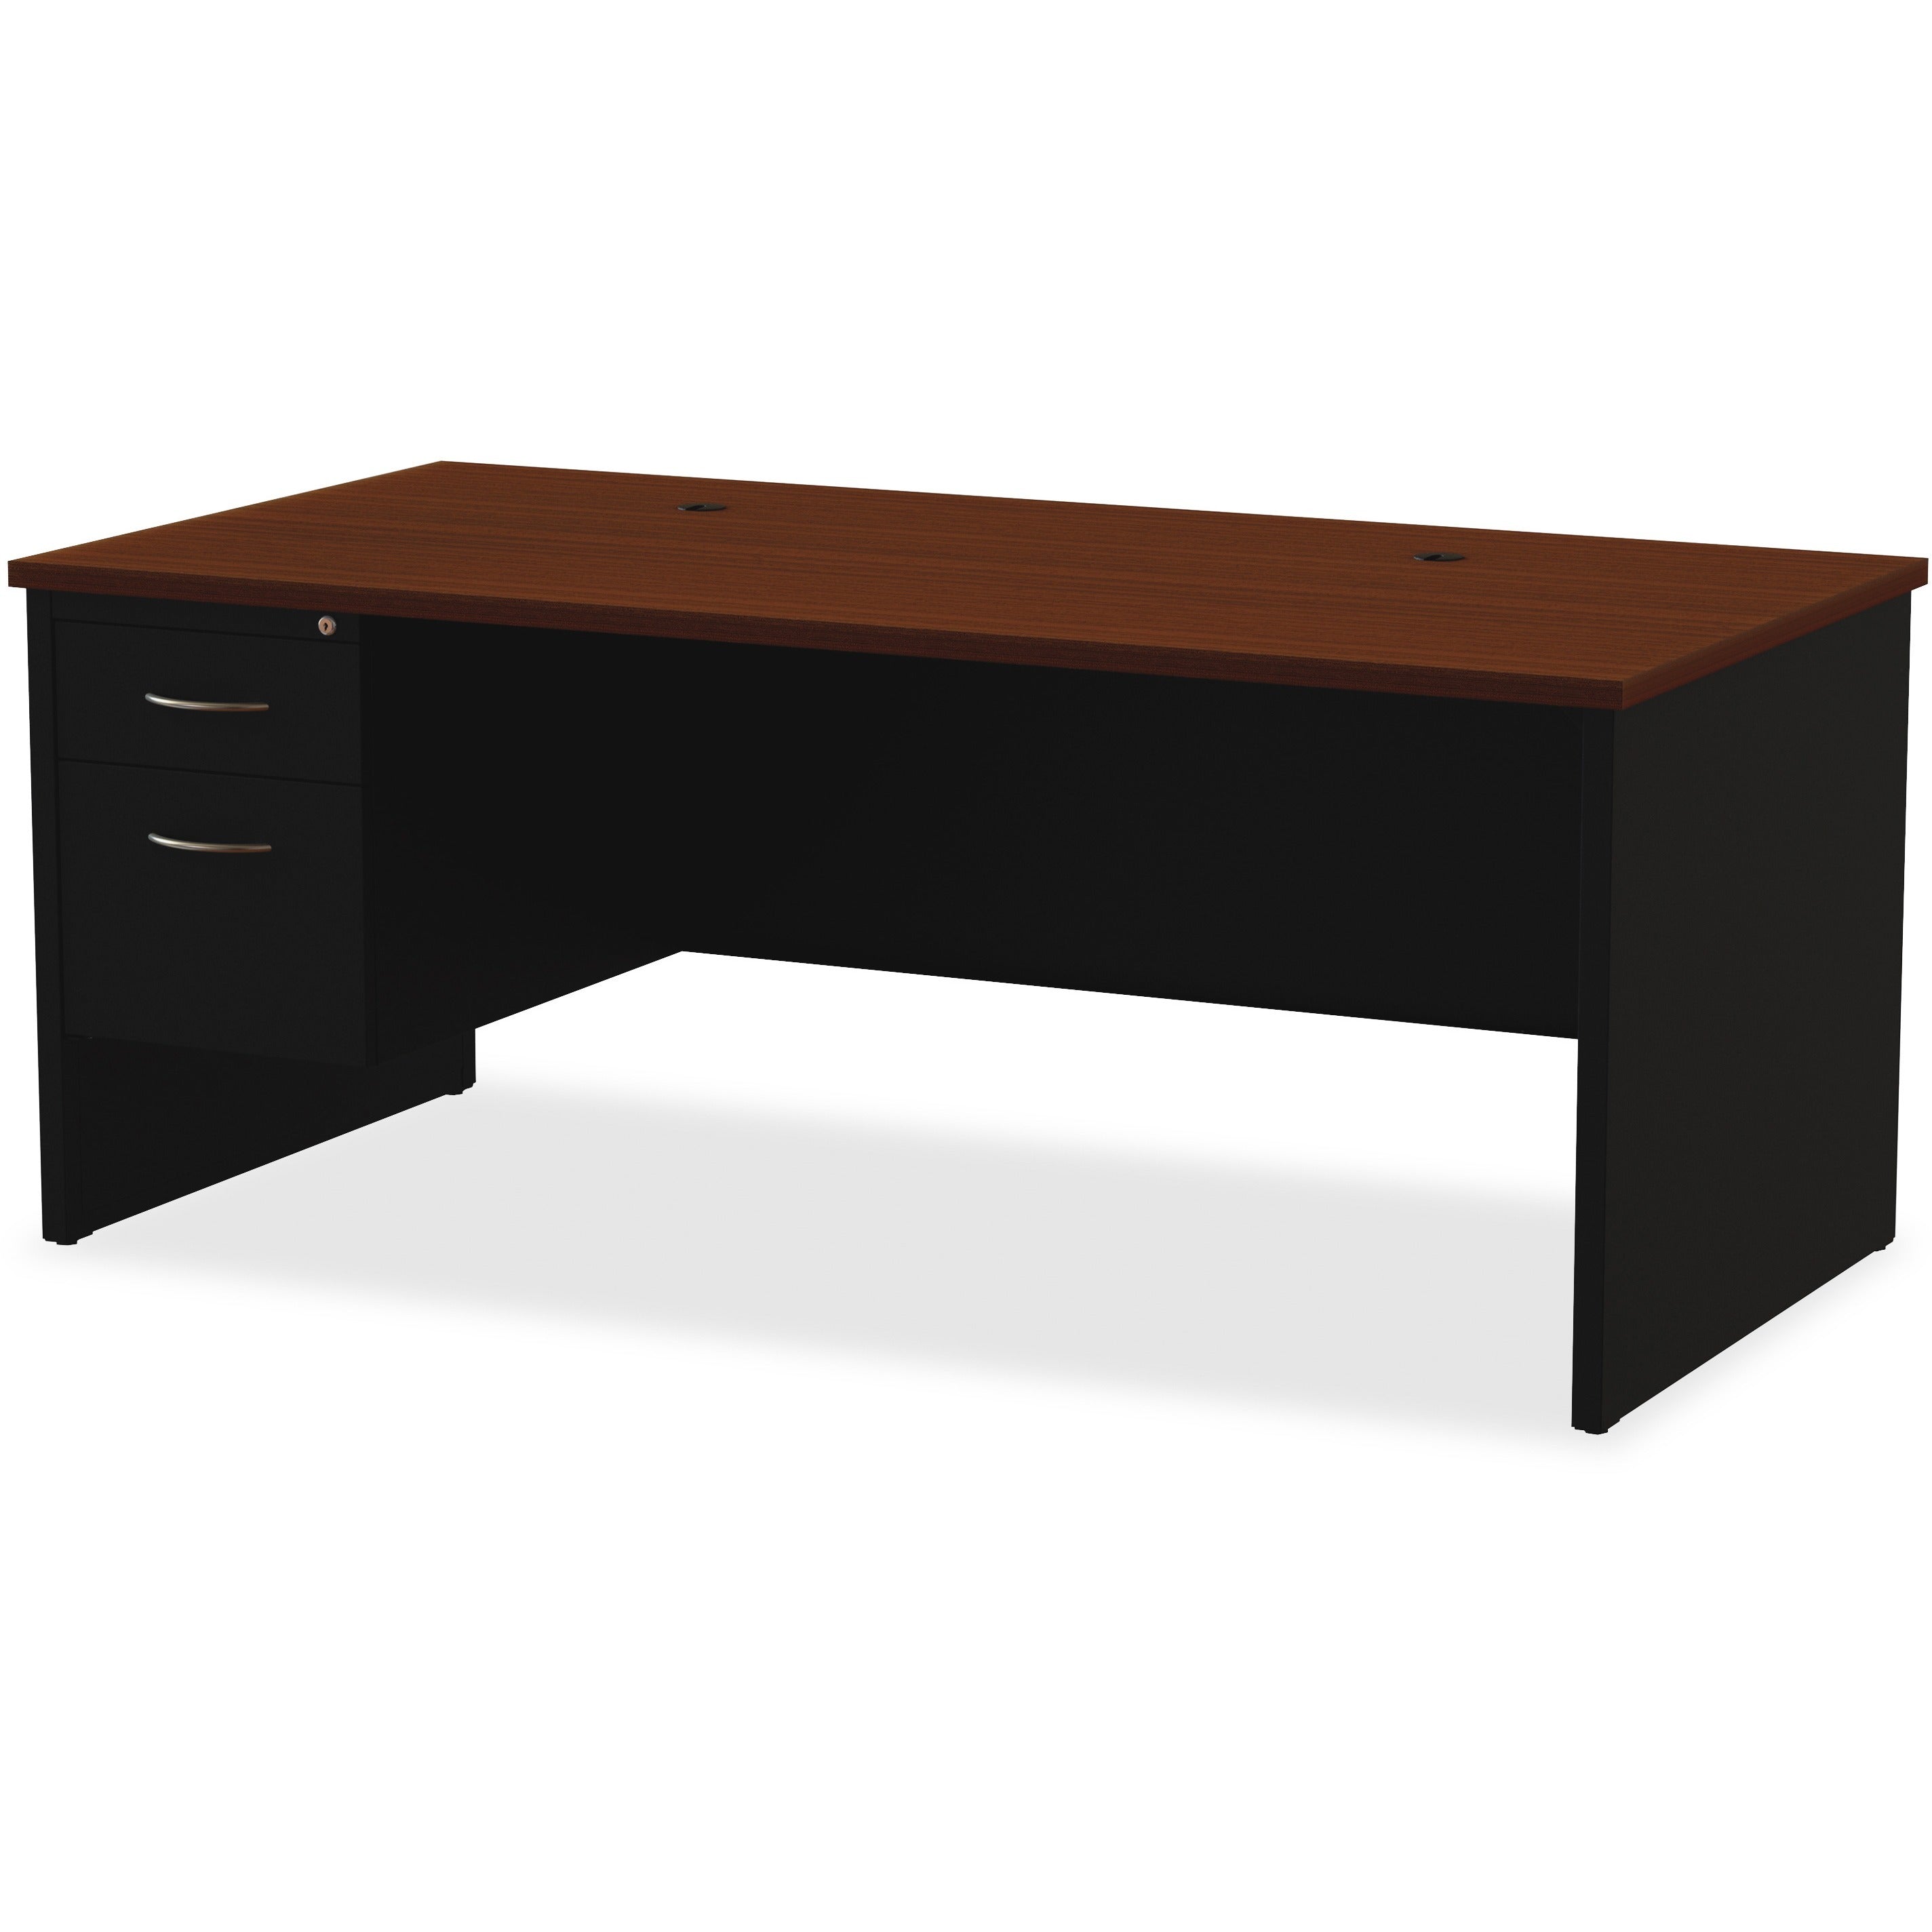 Lorell Fortress Modular Series Desk - 72" x 36" , 1.1" Top - 2 x Box, File Drawer(s) - Single Pedestal on Left Side - Material: Steel - Finish: Walnut Laminate, Black - Scratch Resistant, Stain Resistant, Ball-bearing Suspension, Grommet, Handle, Cor - 2